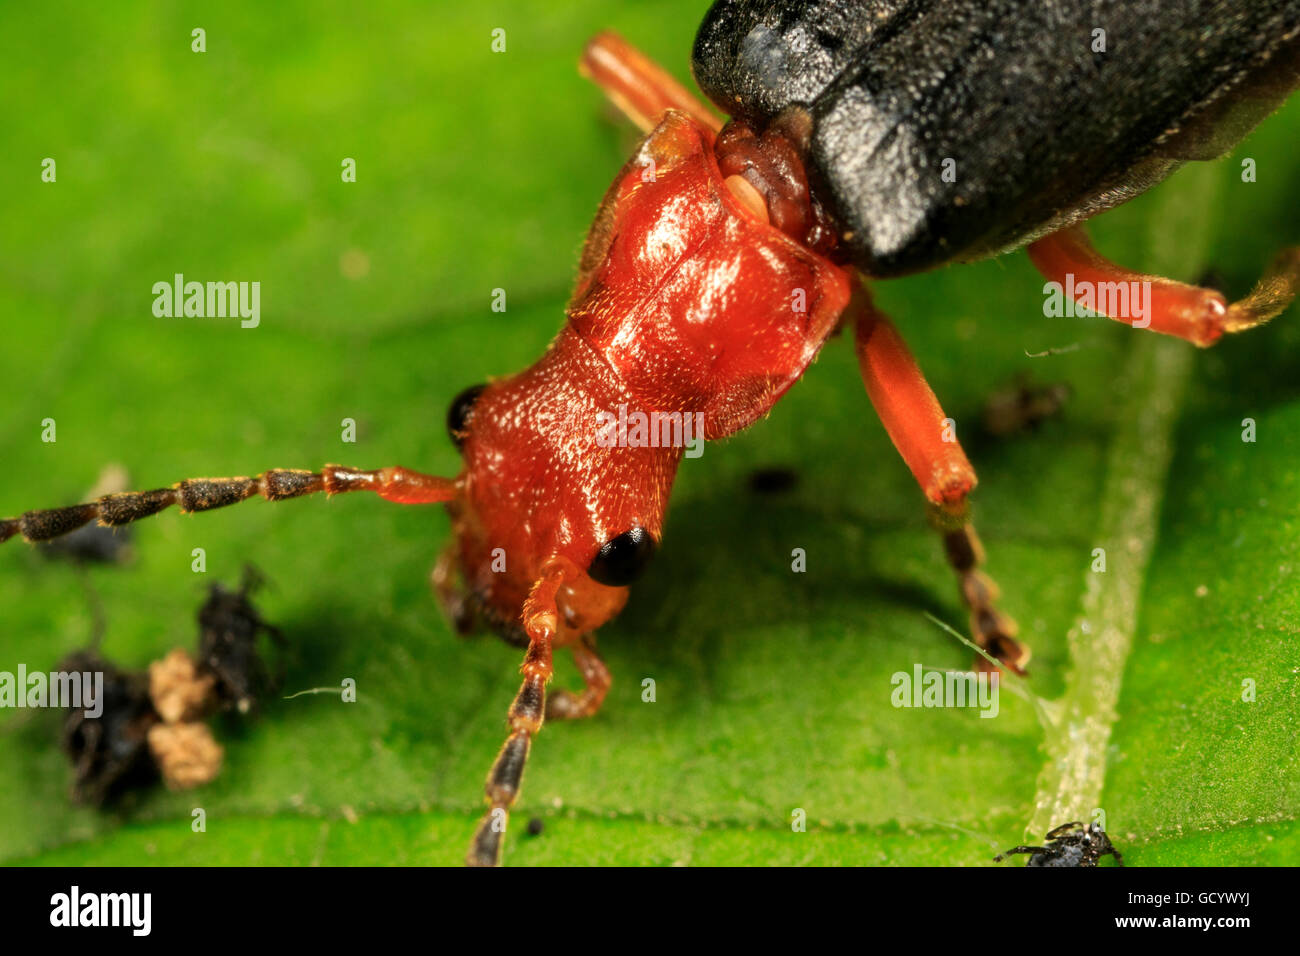 Head and thorax of a soldier beetle (Podabrus tomentosus) Stock Photo